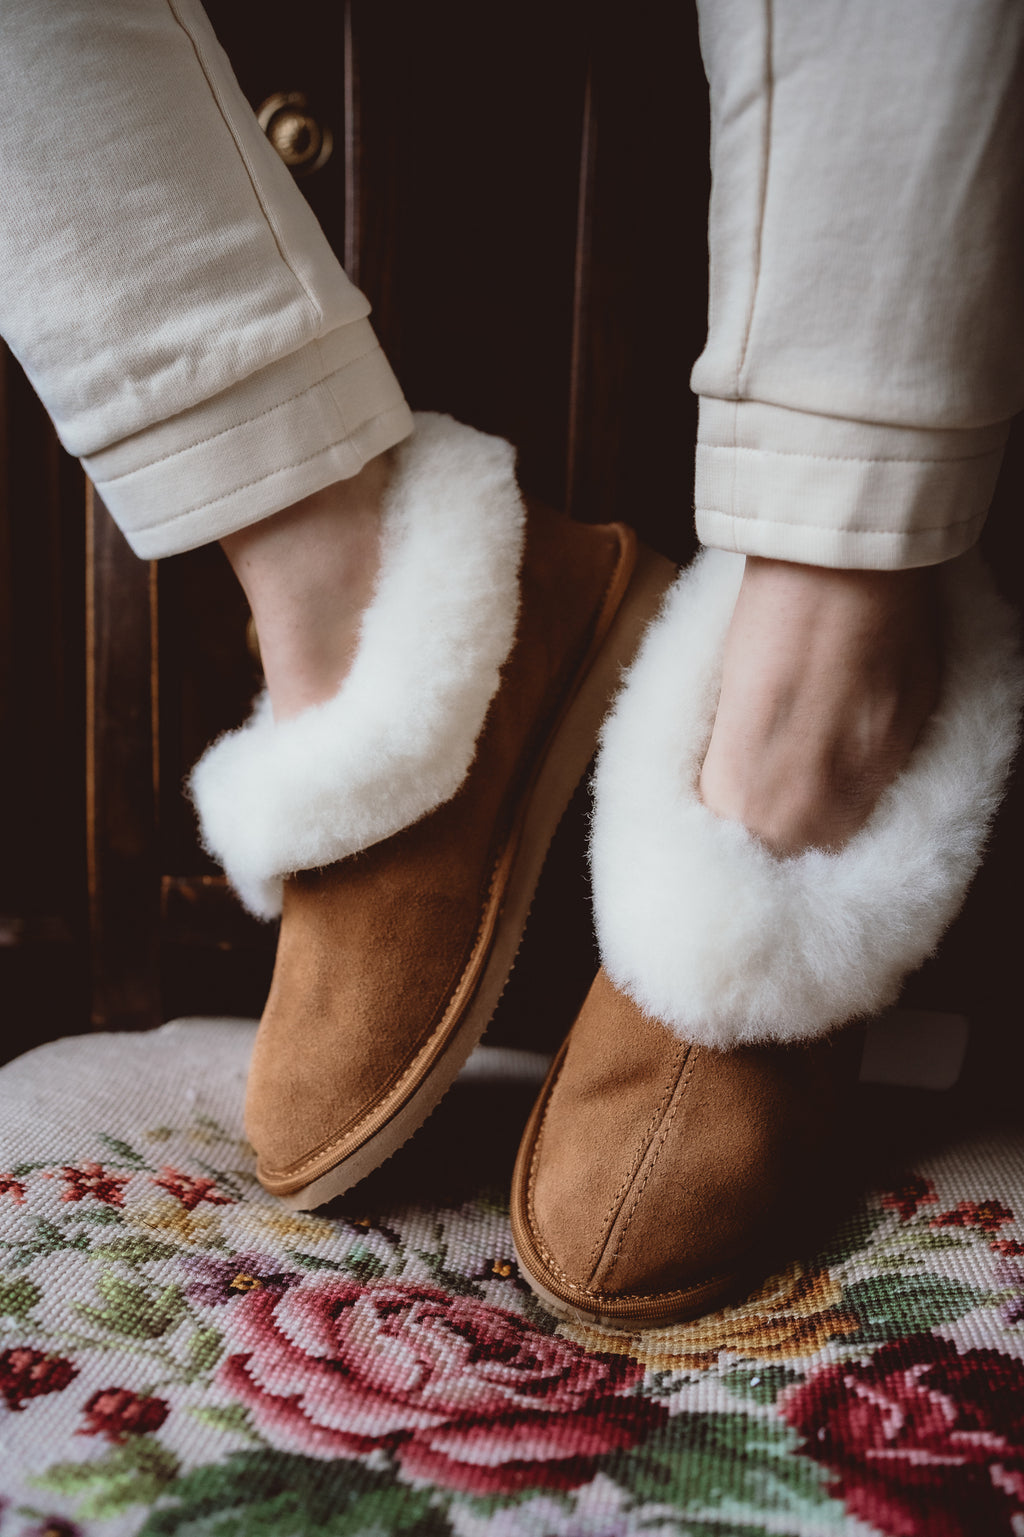 Alt text: Classic sheepskin slippers with white fur, worn by a woman and placed on a hand-embroidered chair.